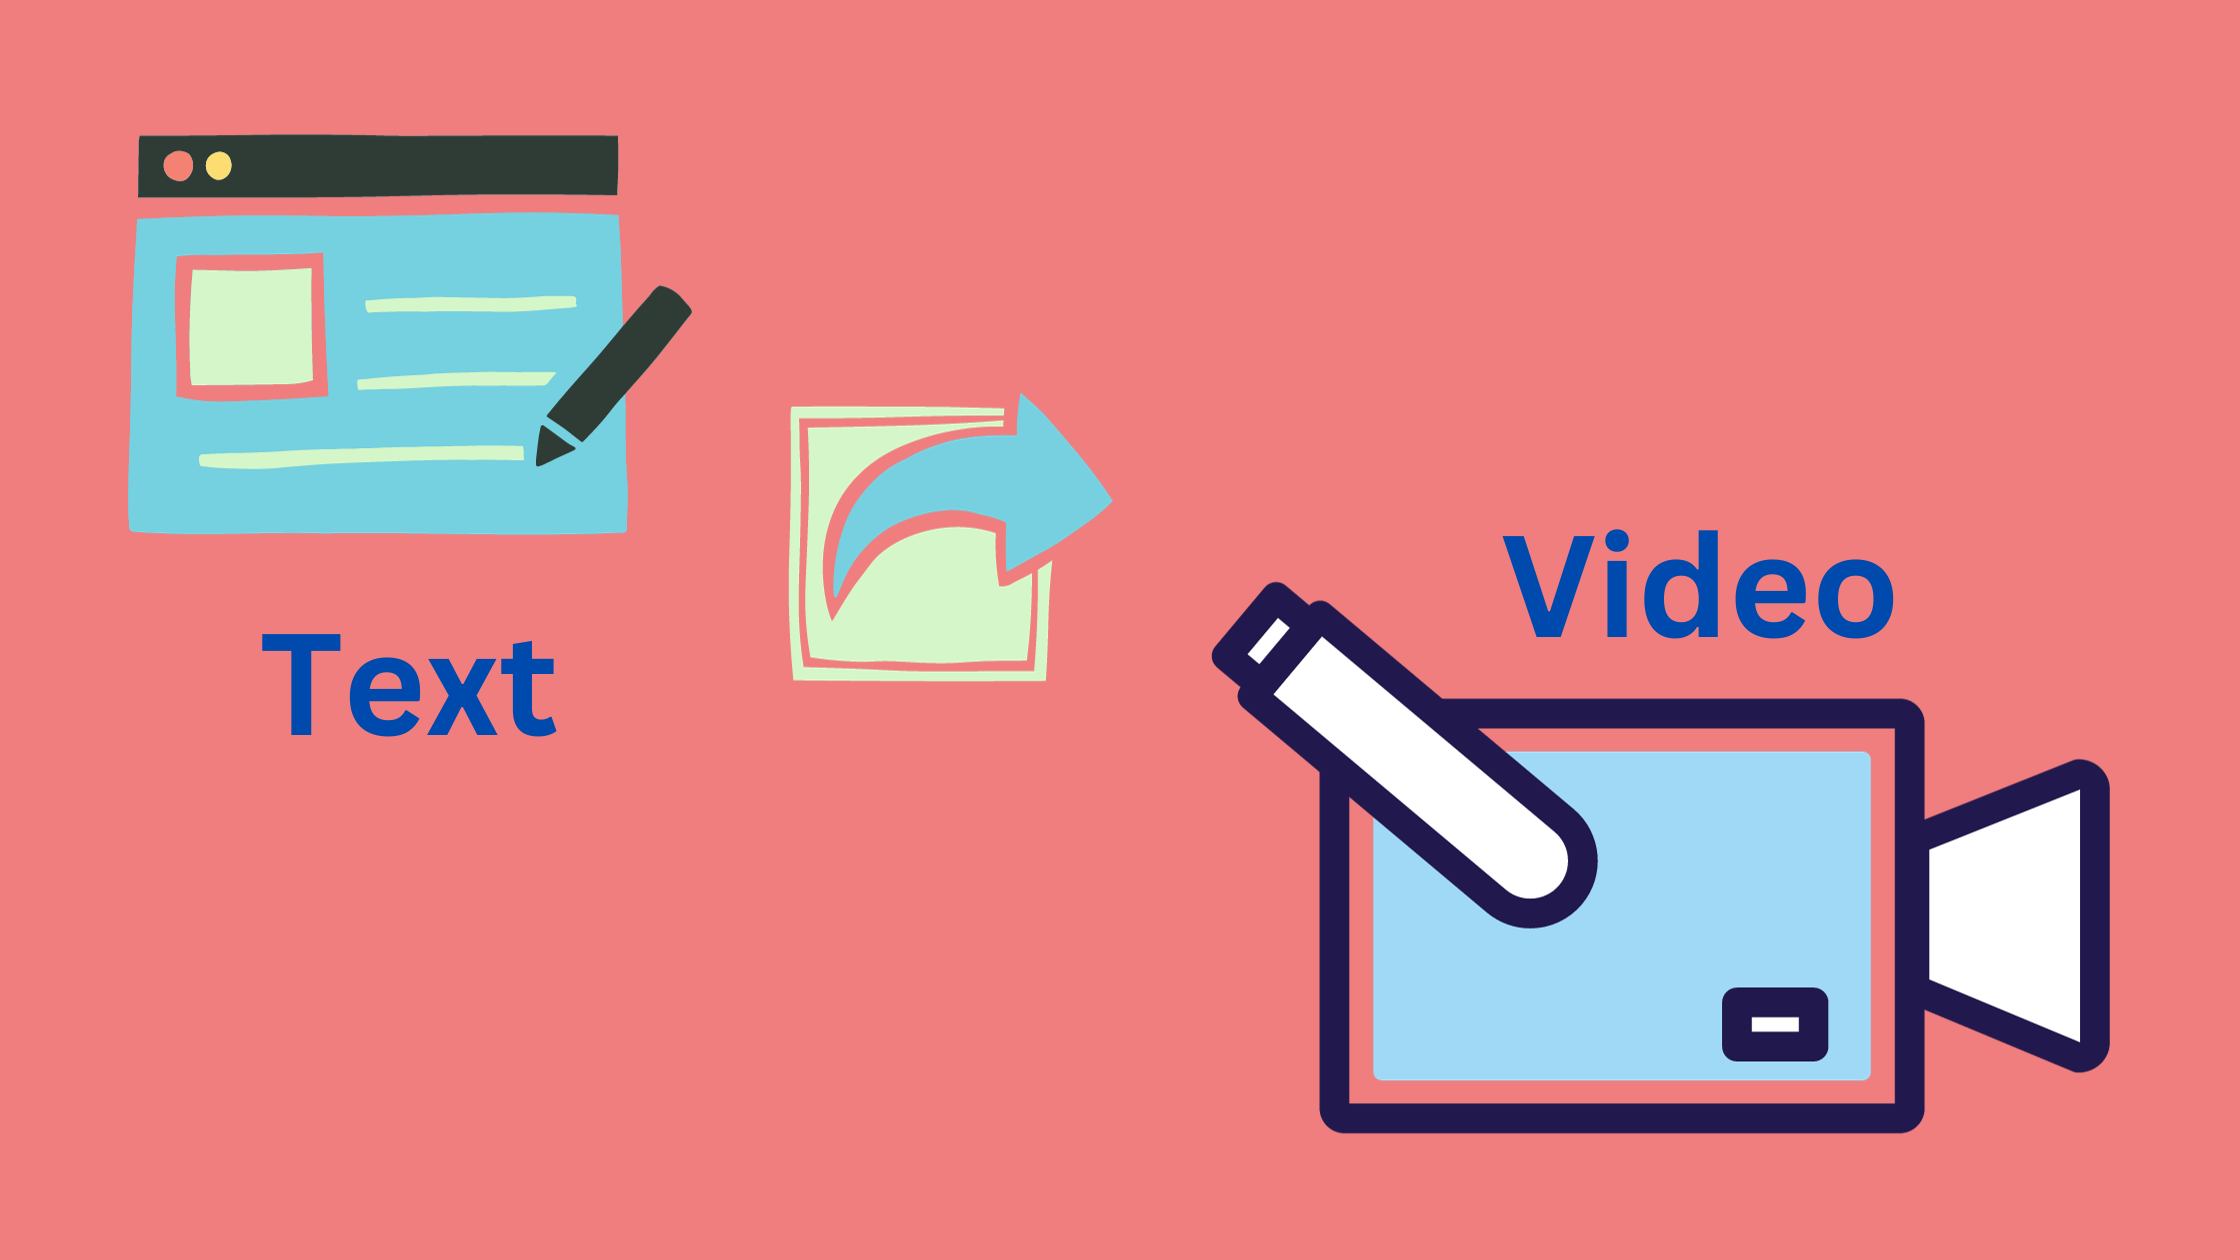 Text to Video Transformation: 10x Effortless with AI Magic